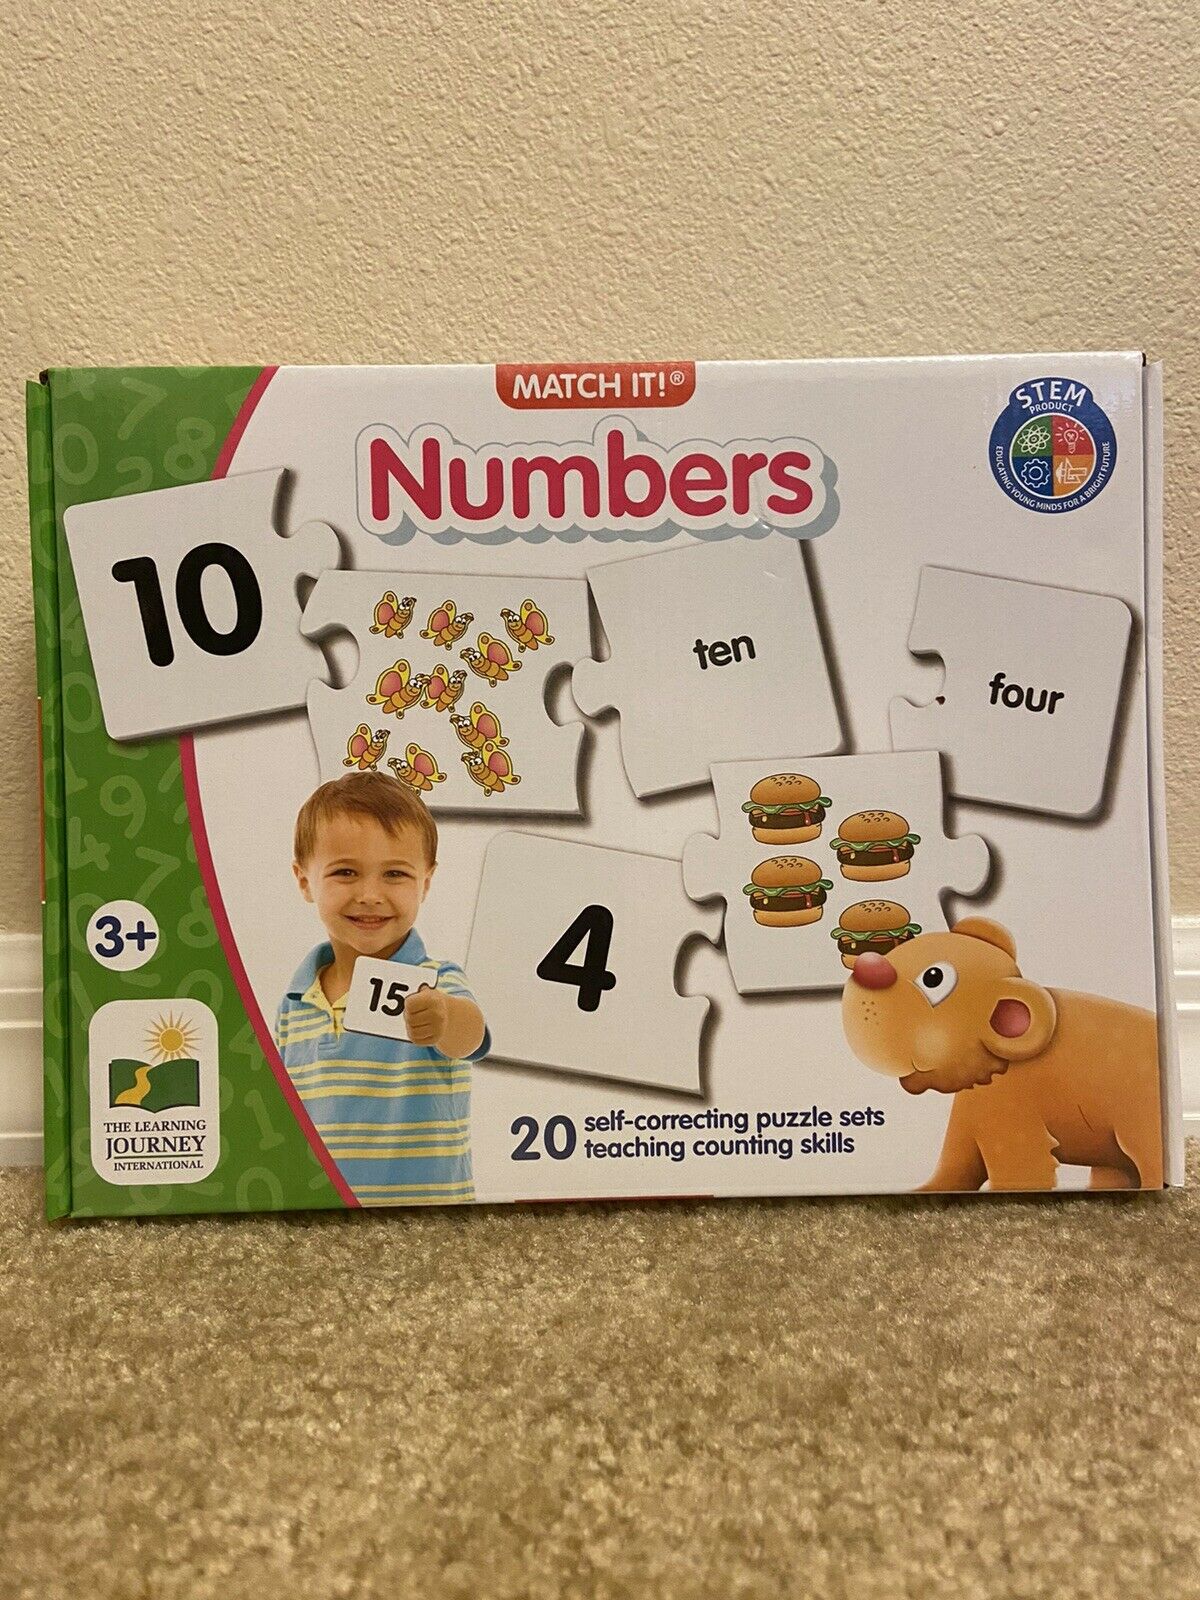 The Learning Journey: Match It! - Numbers - Self-correcting Number & Counting